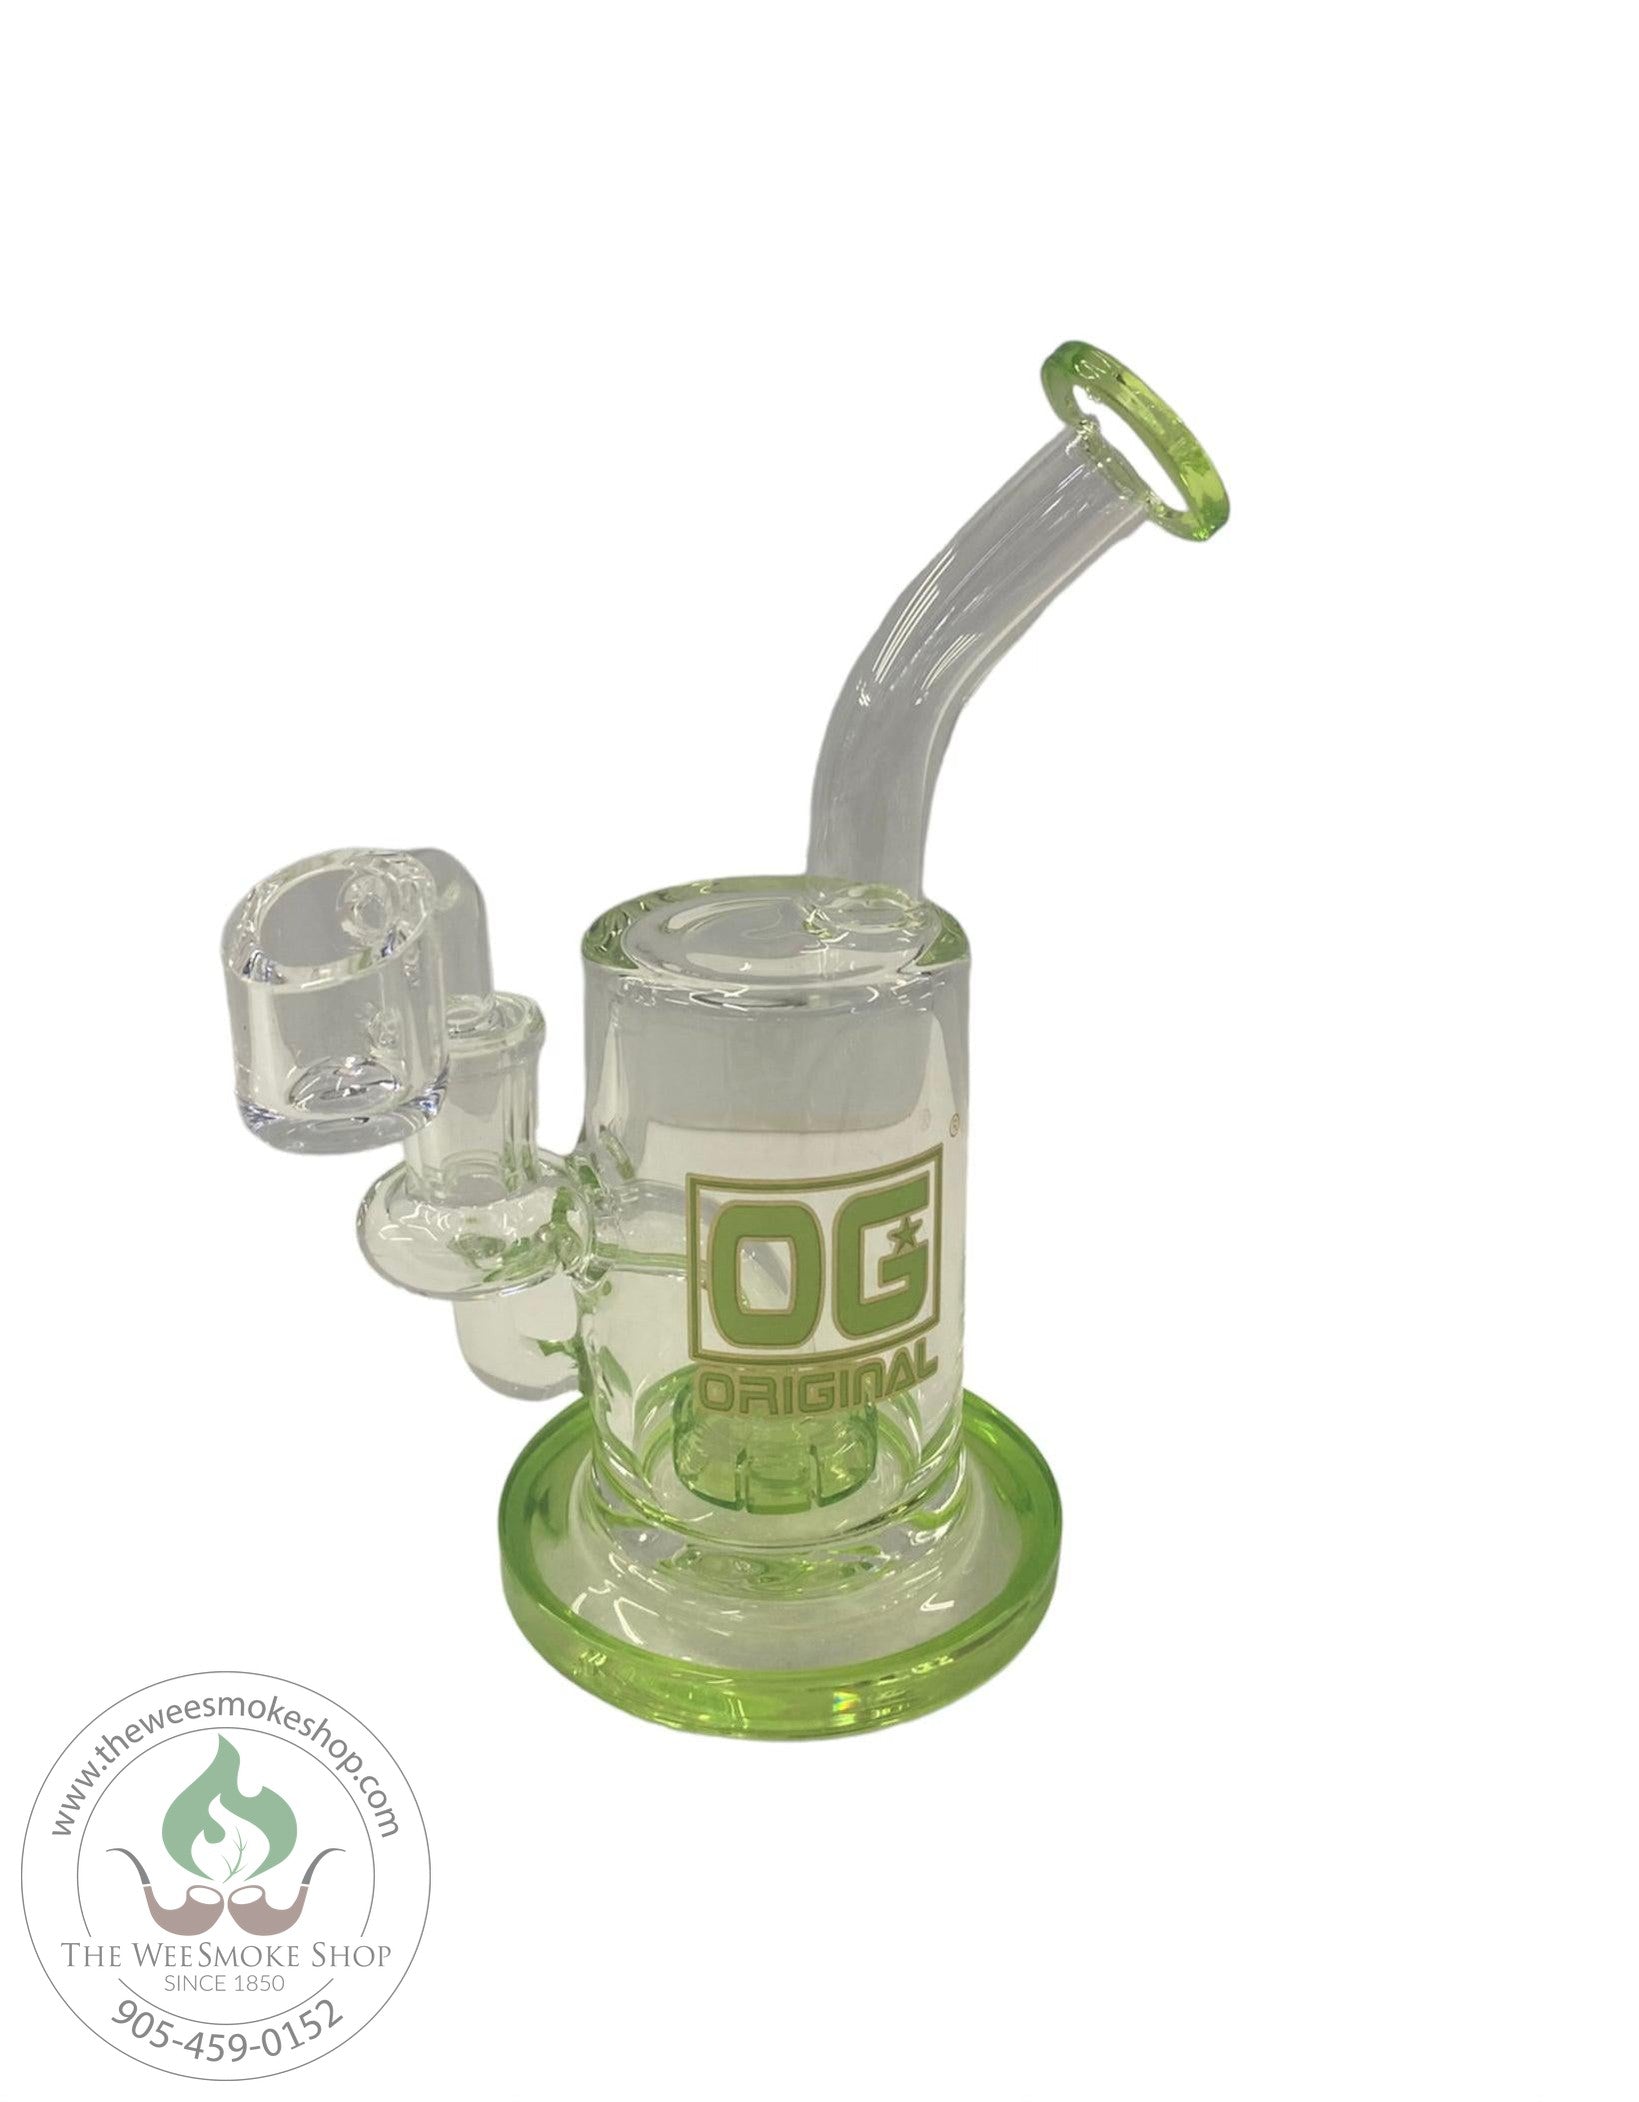 OG 8" Dab Rig with Colourful Showerhead Perc Green - Wee Smoke Shop